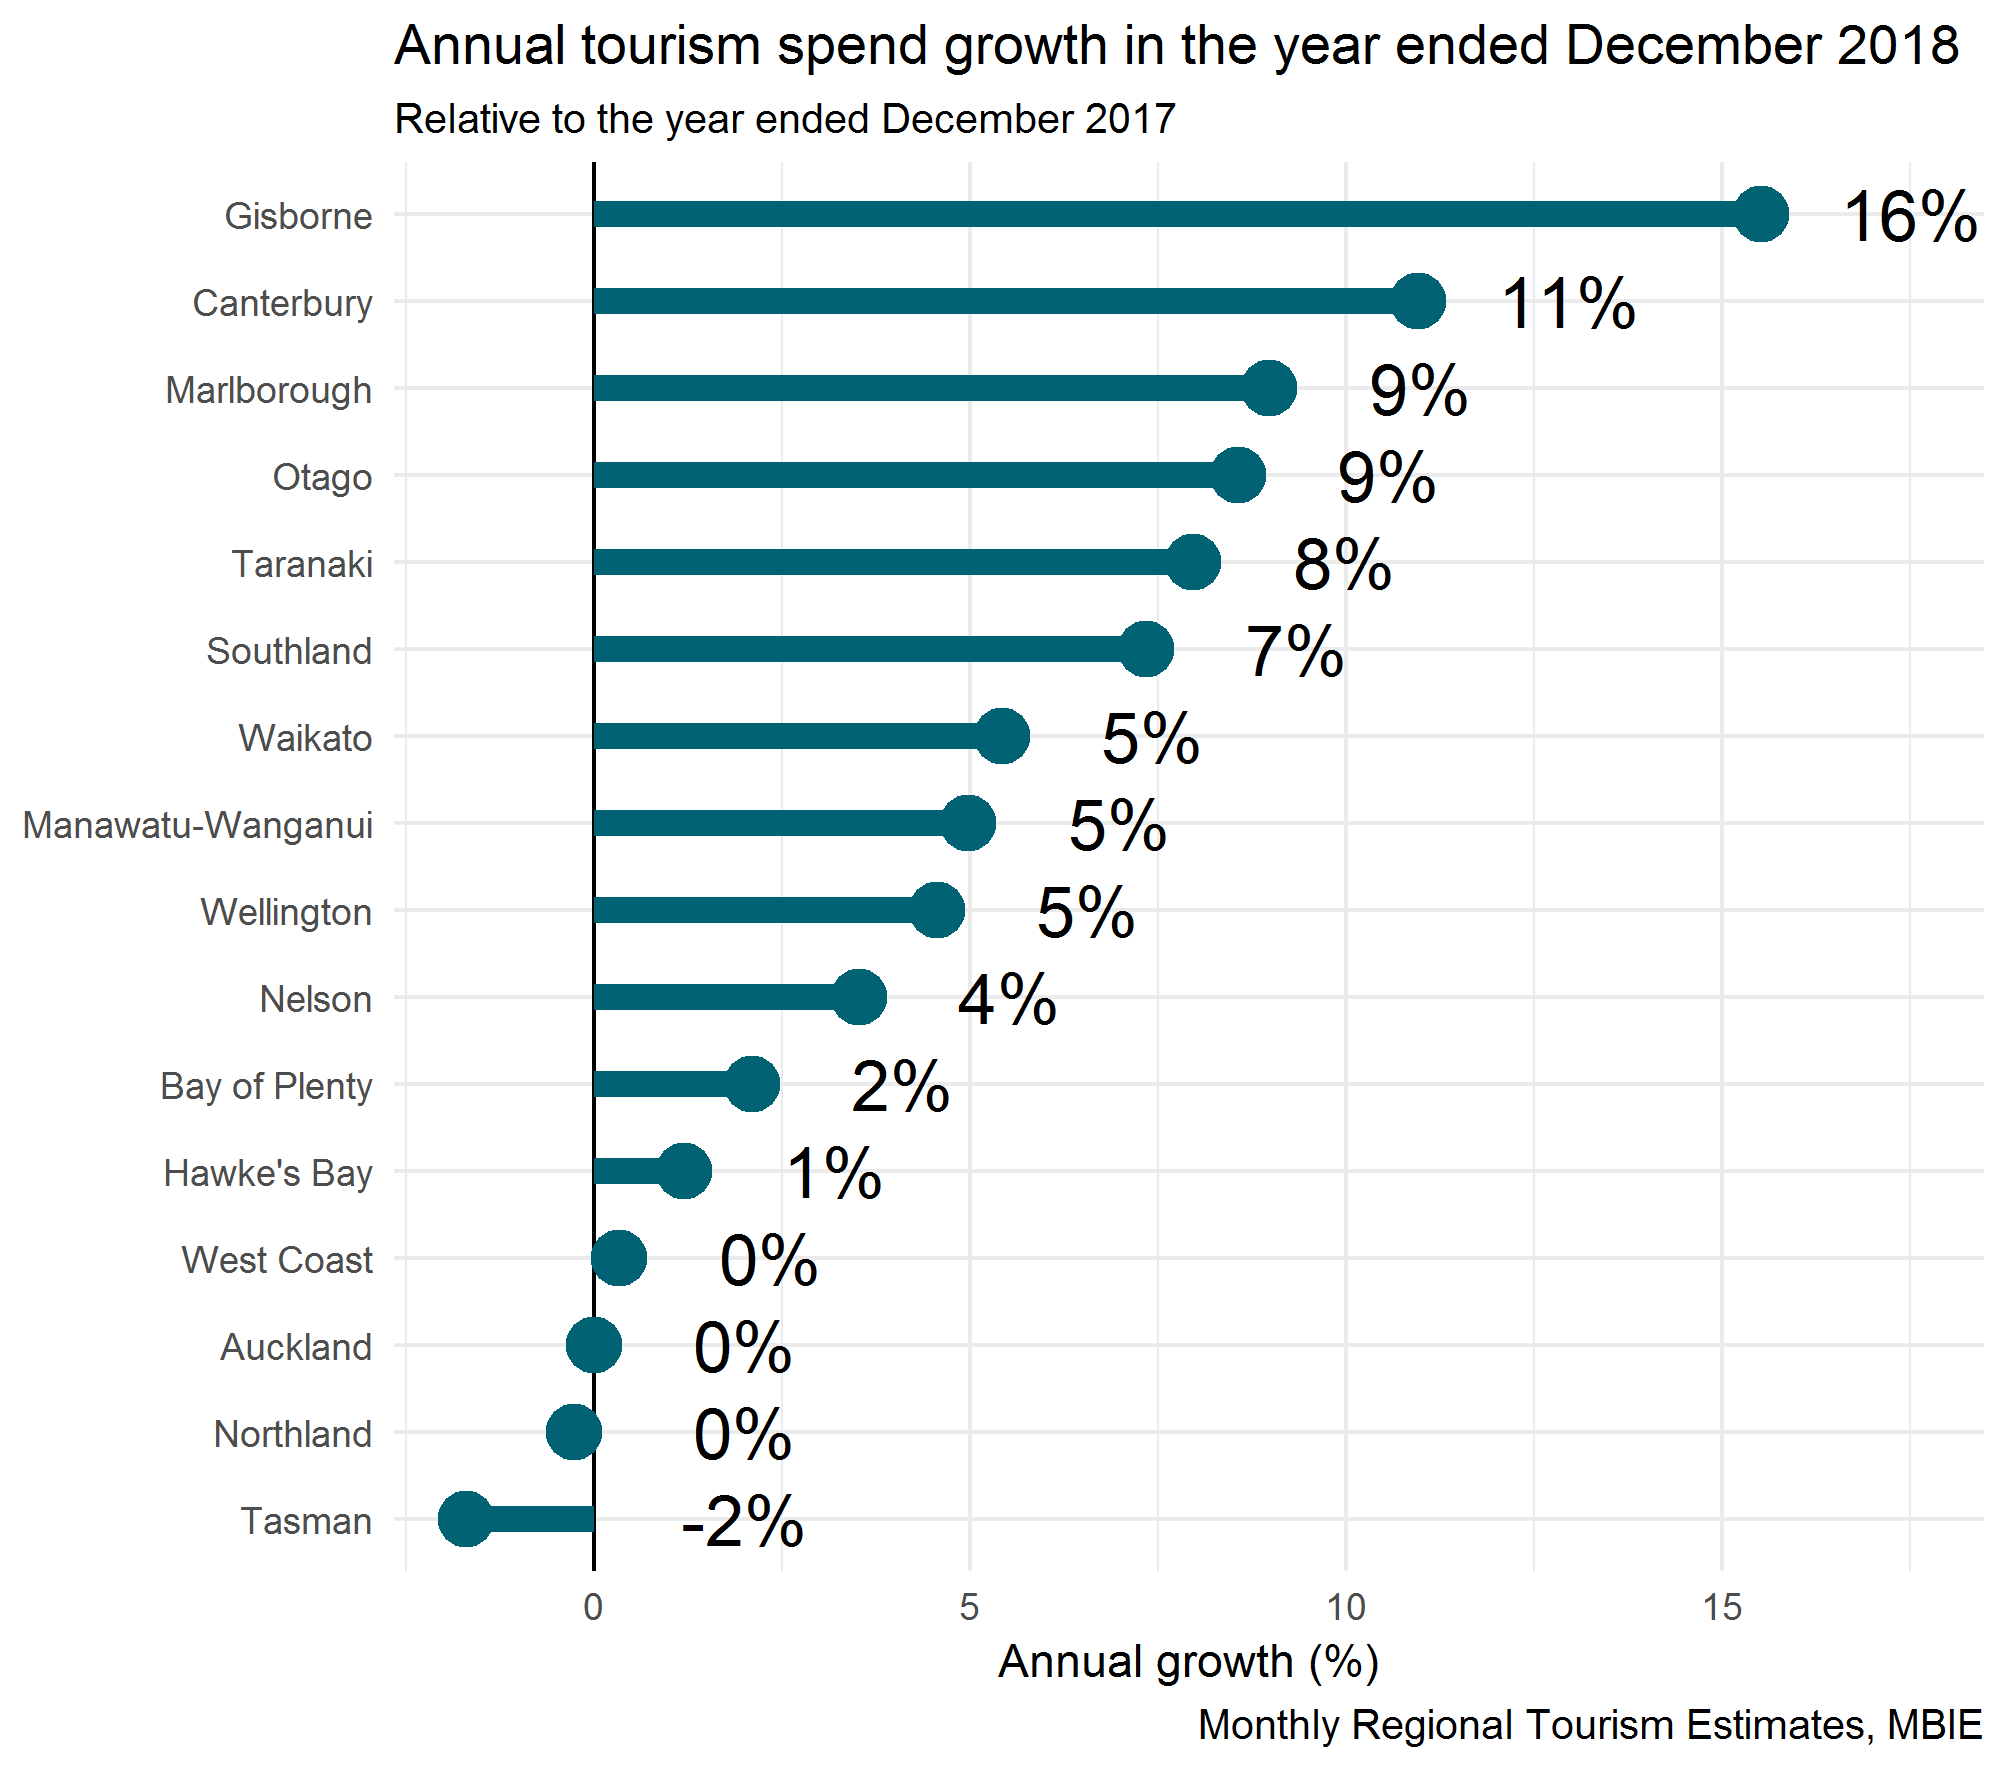 Annual tourism spend growth by region